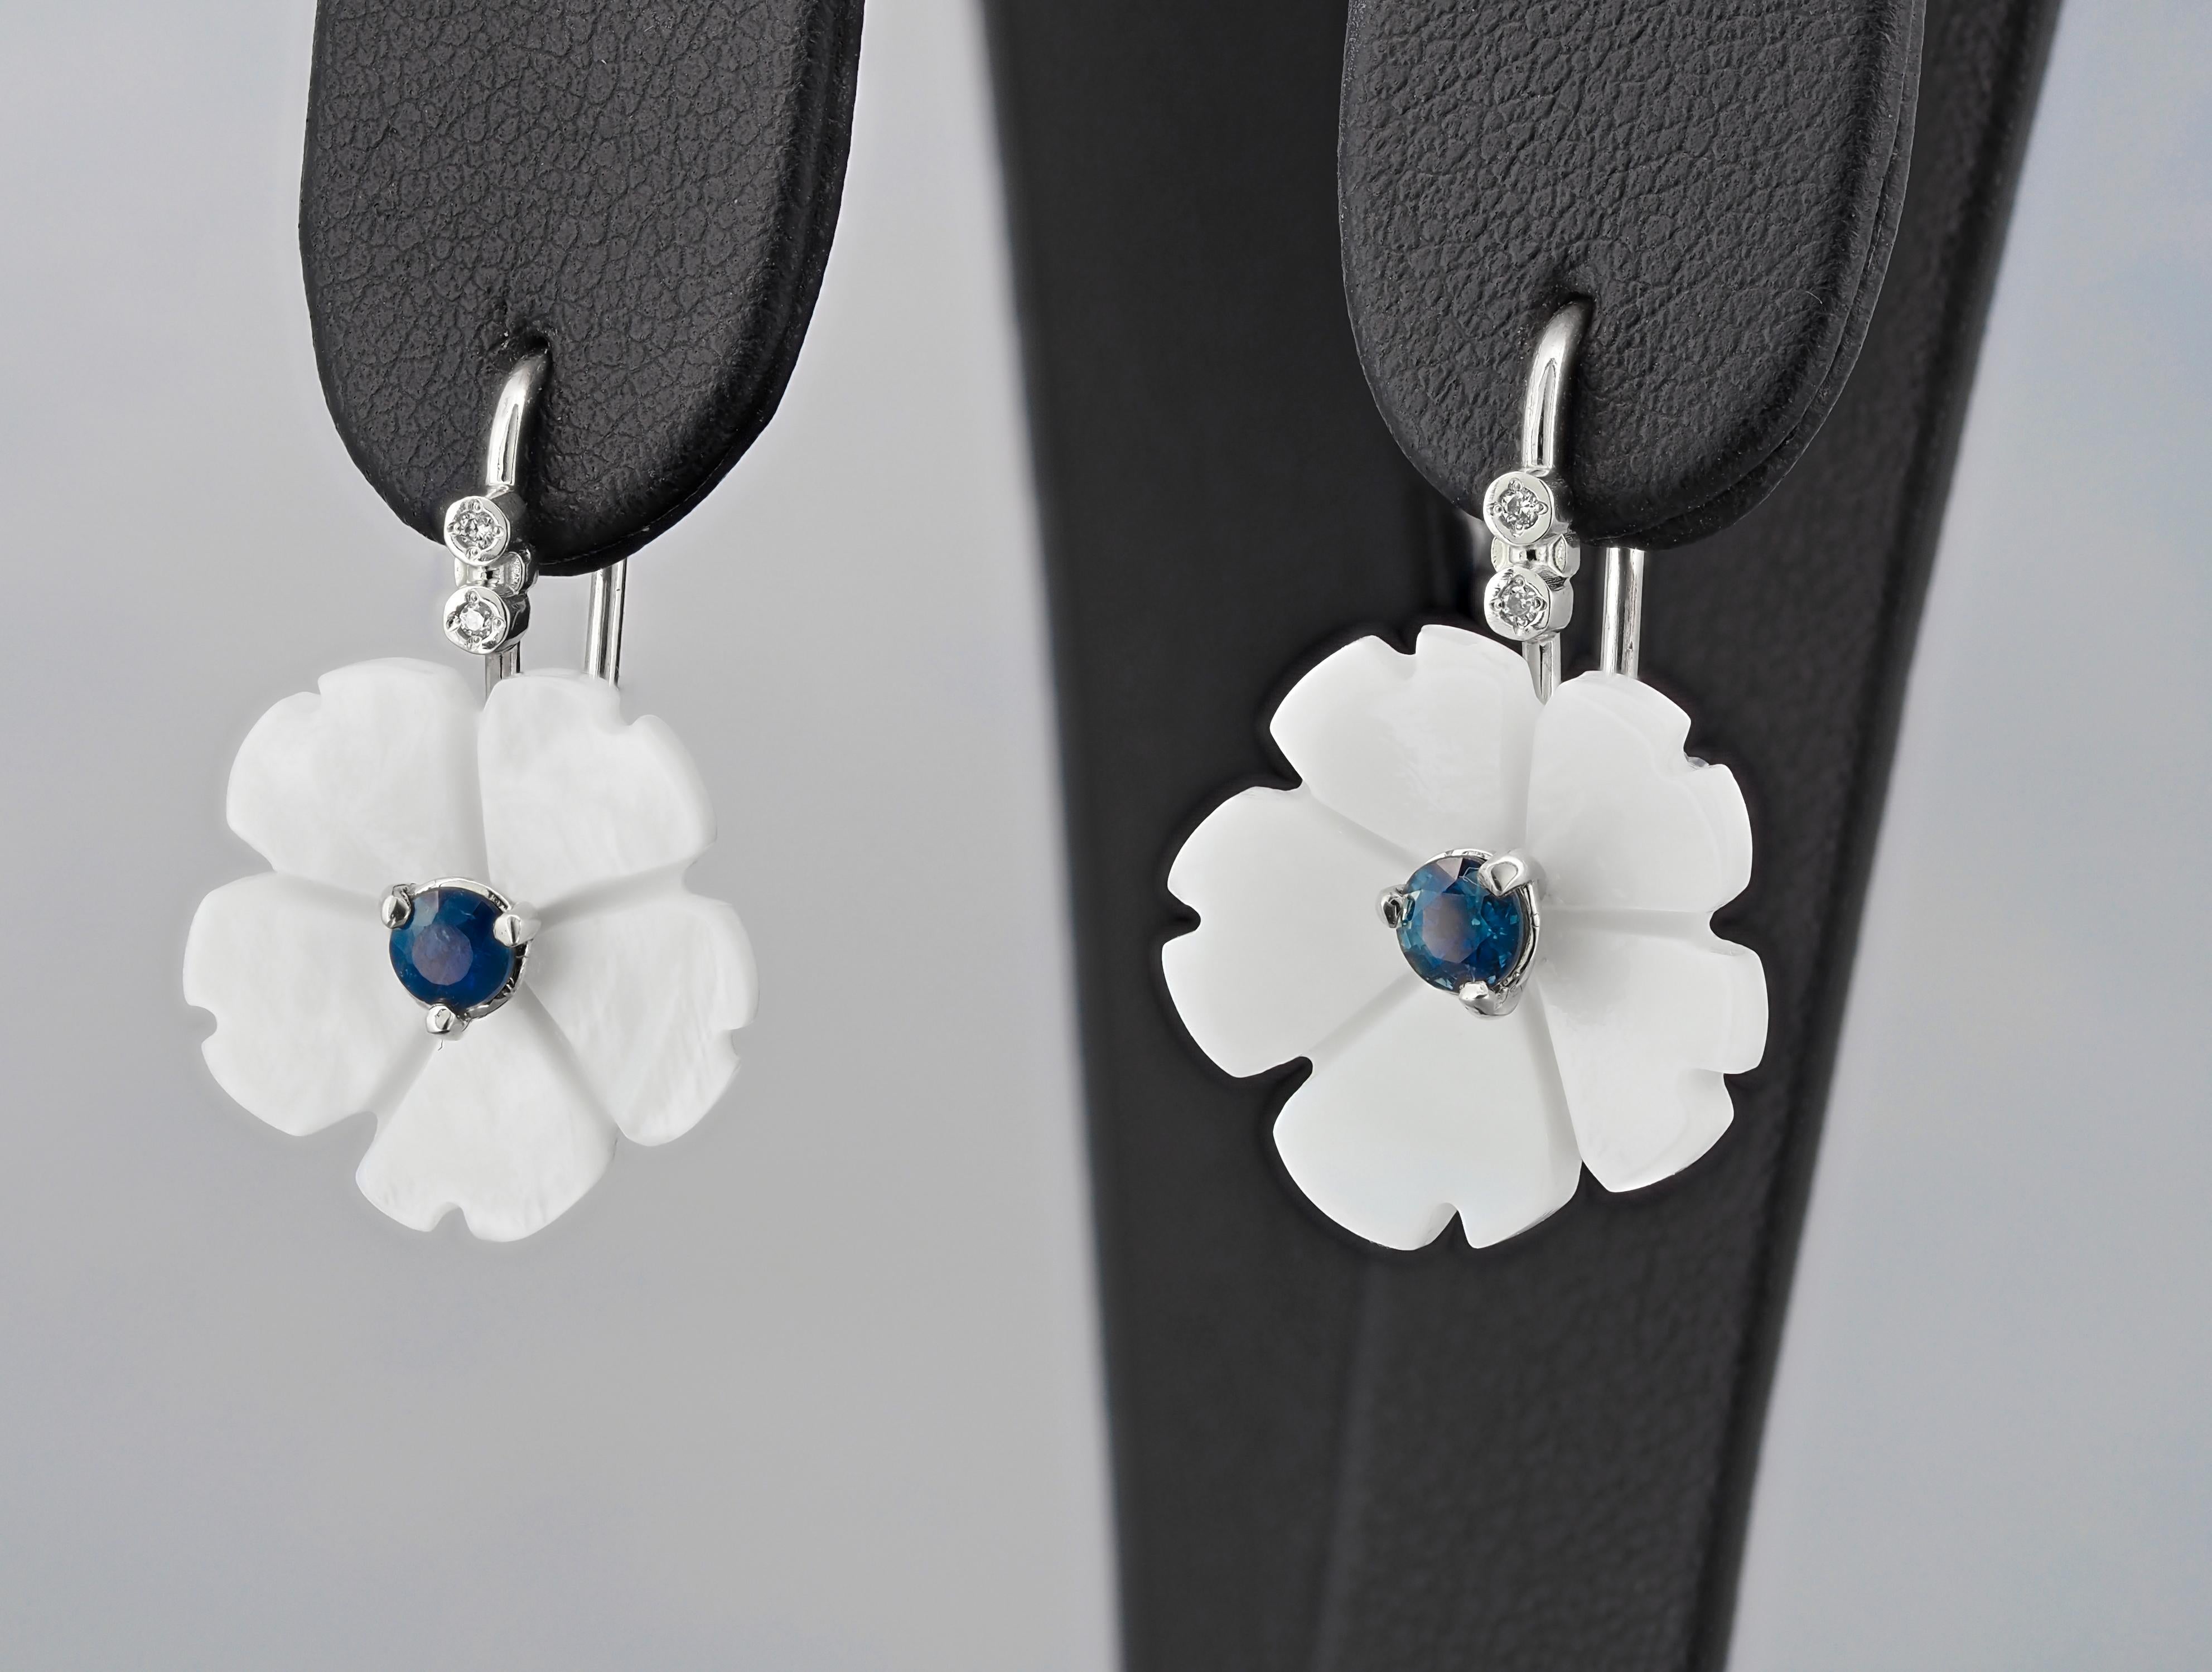 Flower 14k gold earrings with blue sapphires. Blue sapphires and carved mother of pearl earrings. 

Metal: 14k gold. 
Weight: 3 gr
Central stone: Sapphires- 2 pieces 
Cut: Round  
Weight: aprx 0.25 ct. total. 
Color: Blue
Clarity: Transparent with